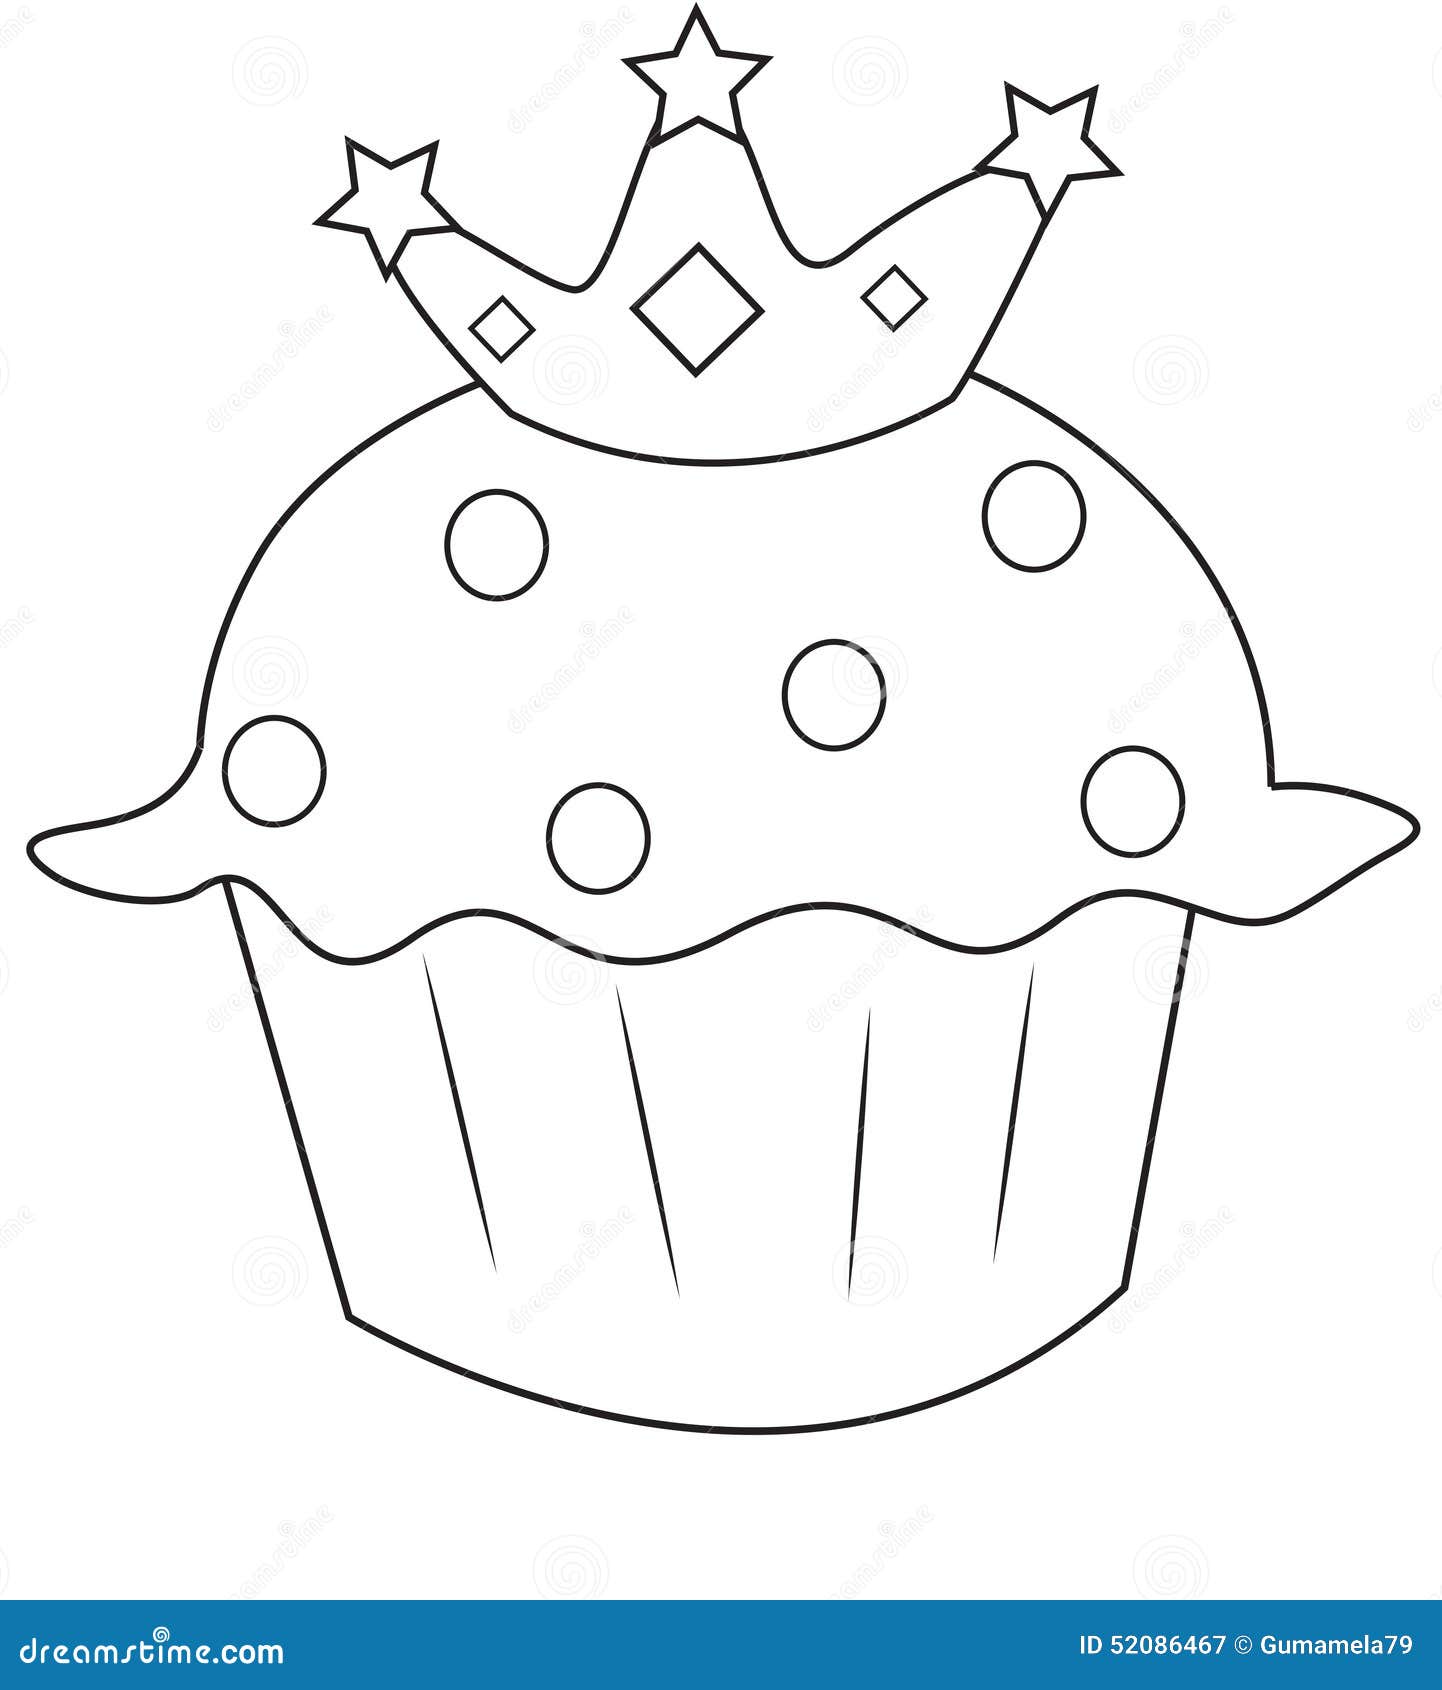 cake coloring pages with congratulations - photo #27